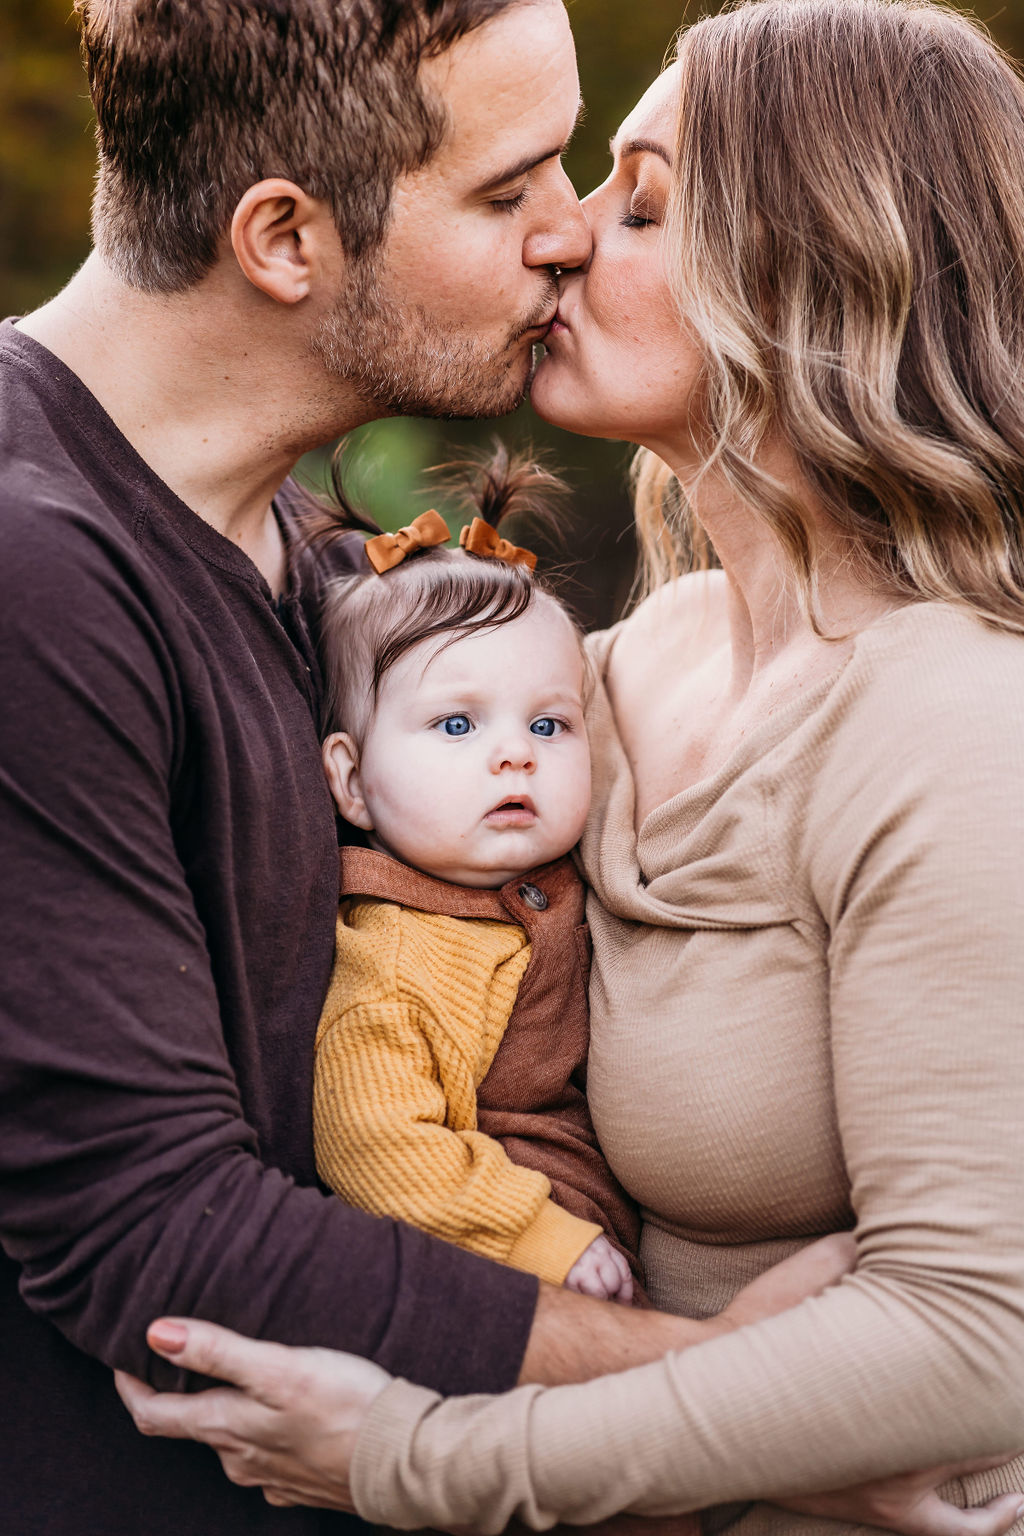 mom and dad kissing while baby is in between them